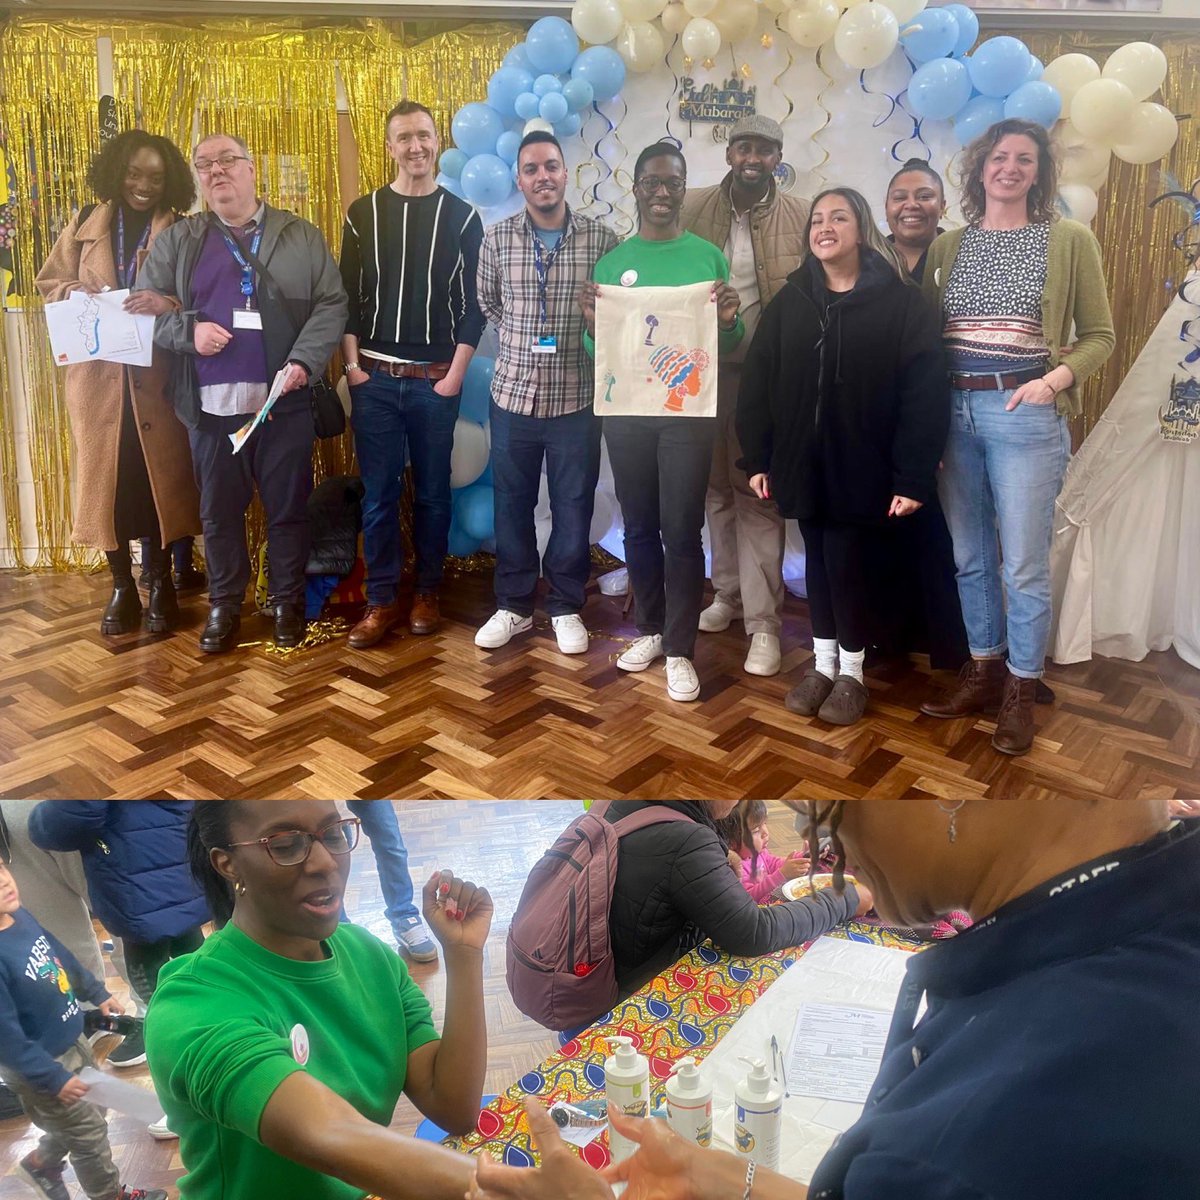 Great to join @Thriving_Stock Eid Celebrations. So good to see @ericauk so many families & community groups in attendance celebrating our diversity. A big thank you to all the staff &volunteers for organising a fun, filled day for the local community to enjoy. #EIDMubarak ☪️